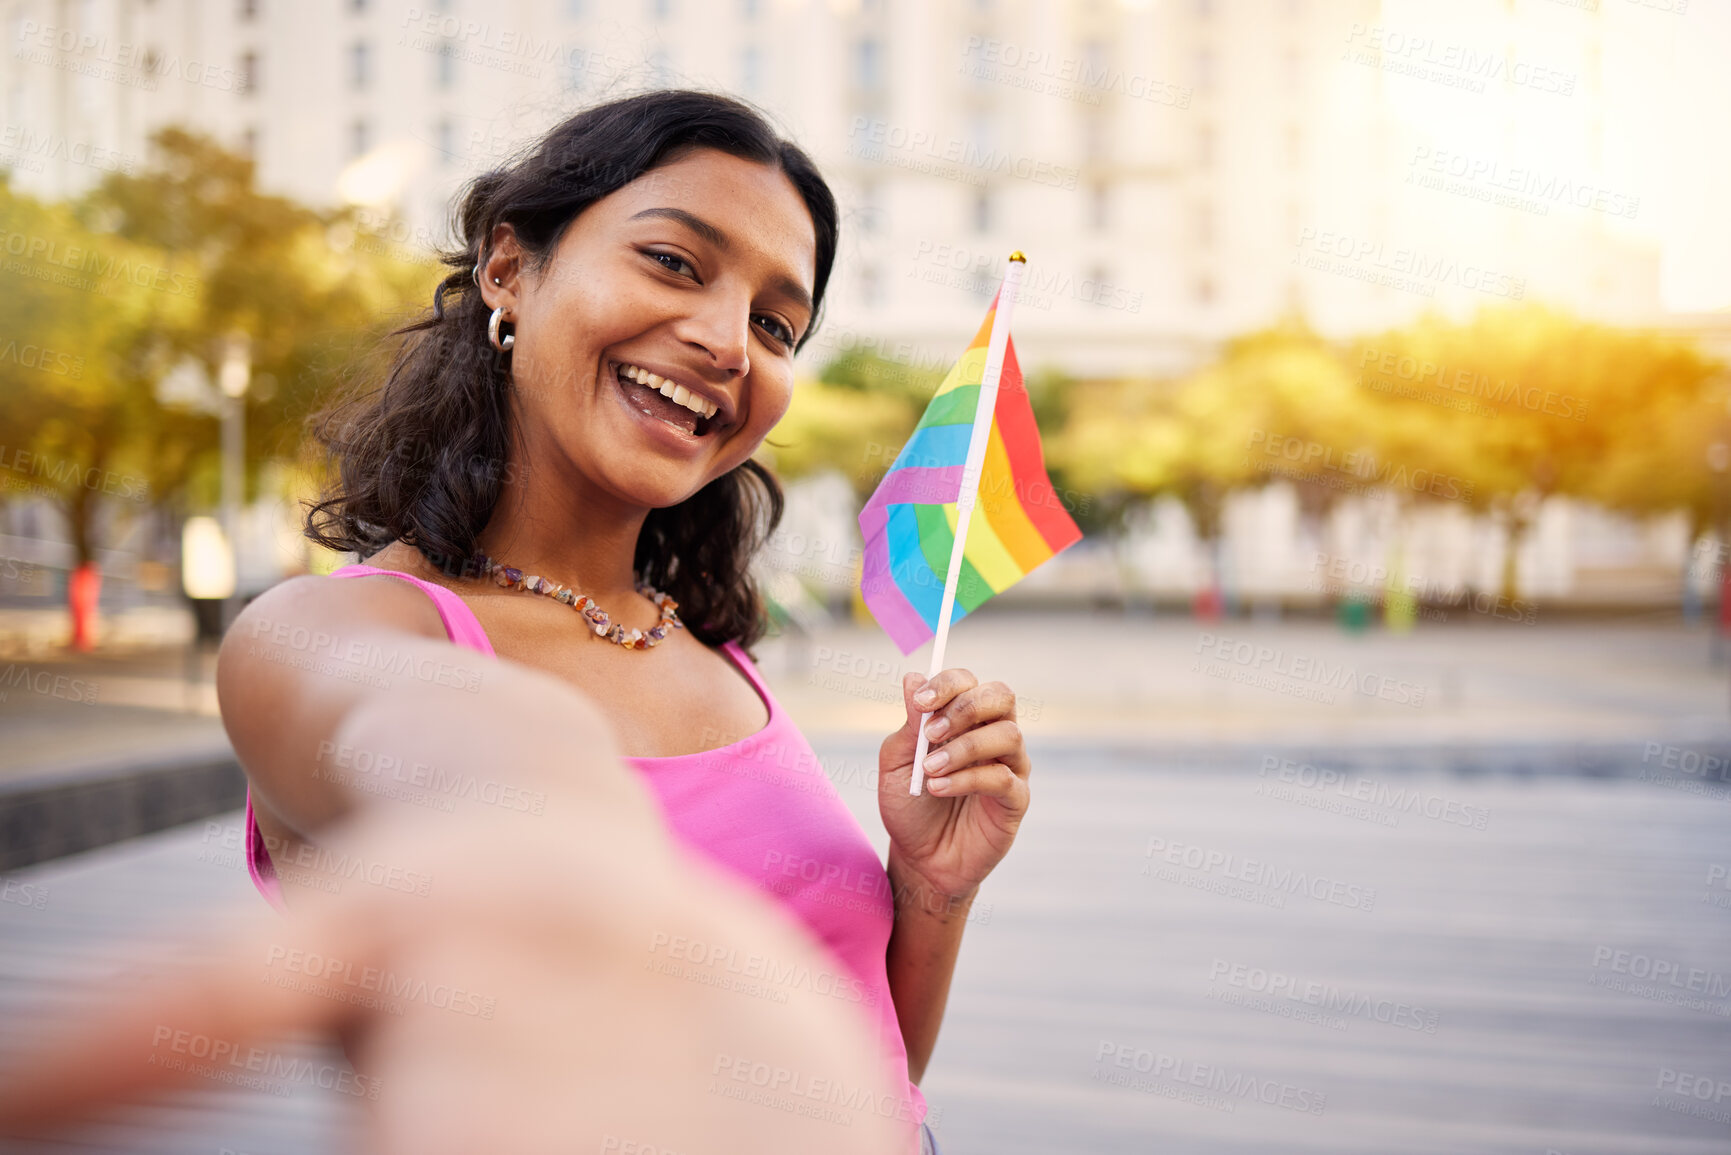 Buy stock photo Selfie, lgbtq event and woman with a flag for sexuality freedom, happy celebration and gay rights at a festival in the city of Germany. Smile, photo and portrait of a girl at a pride street party